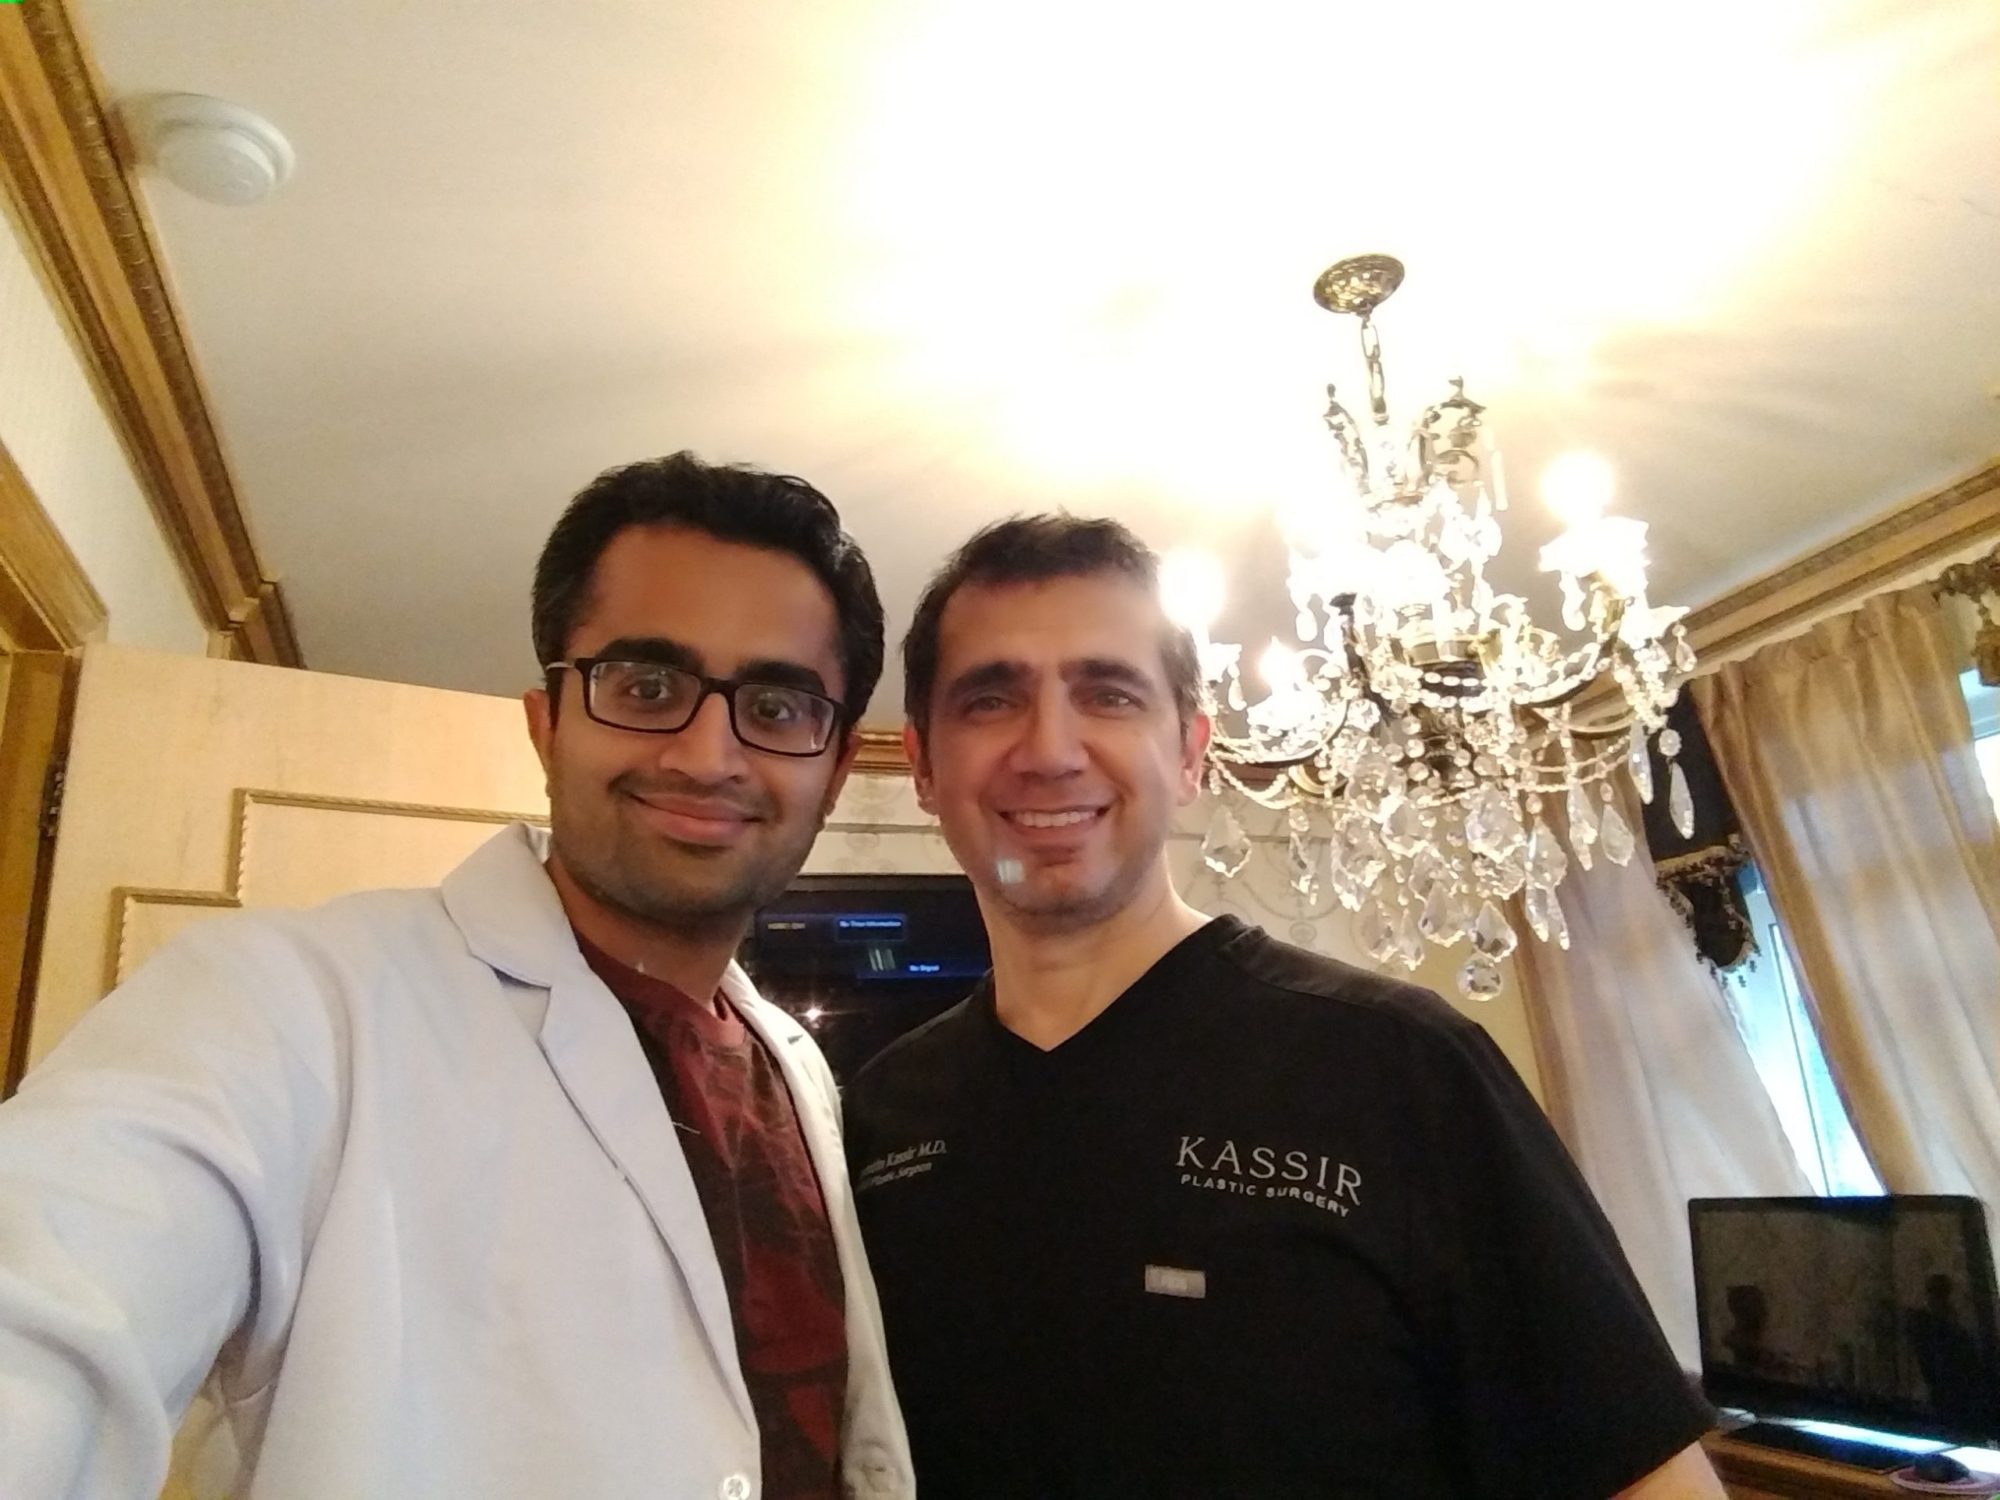 Dr. Aniketh with Dr. Kassir, an expert in open and nonsurgical rhinoplasty